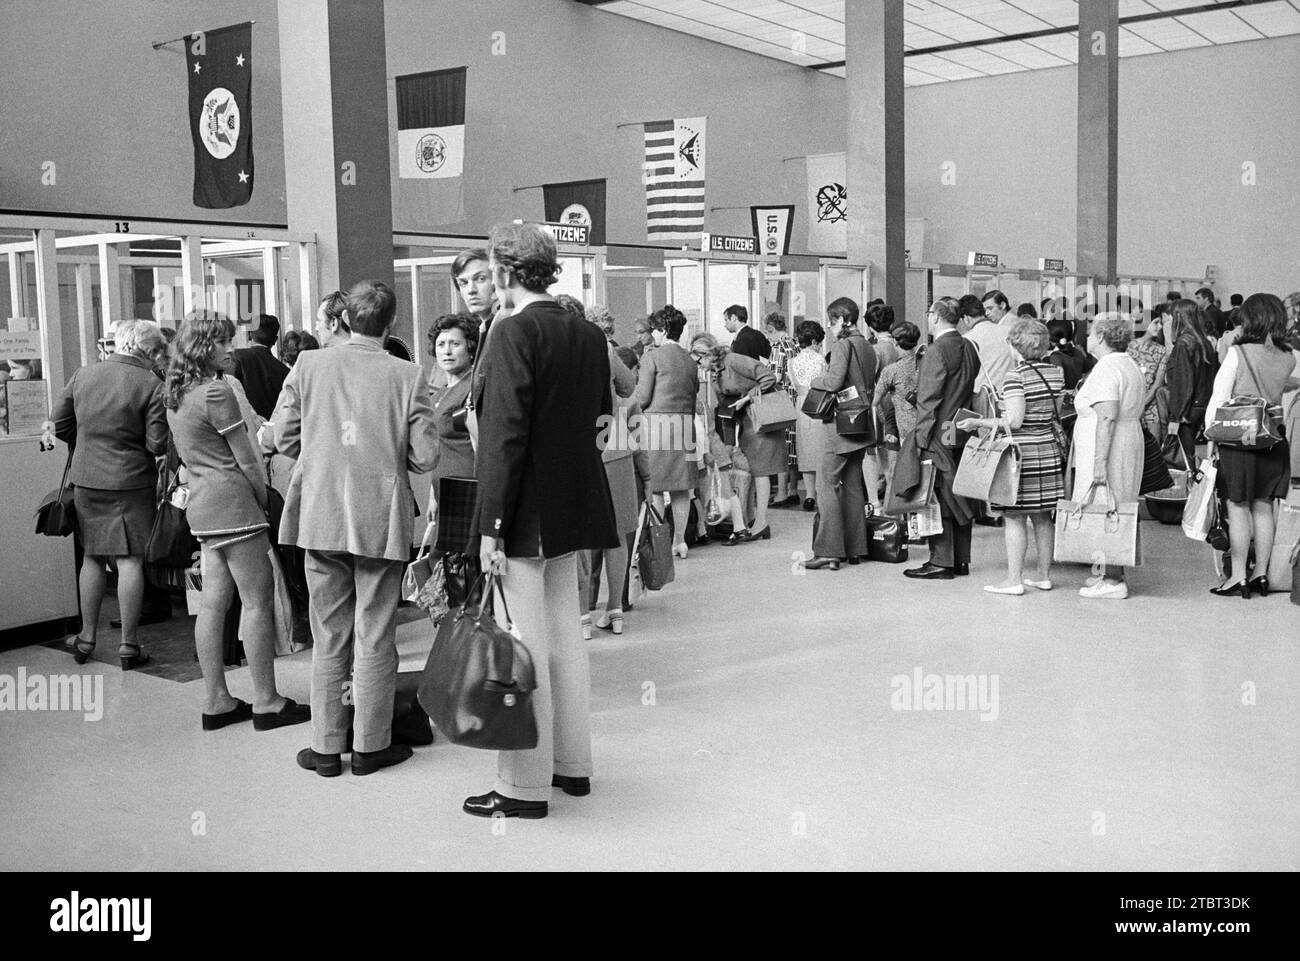 New arrival of visitors lining up at customs checkpoint, John F. Kennedy International Airport, Jamaica, Queens, New York City, New York, USA, Warren K. Leffler, U.S. News & World Report Magazine Photograph Collection, June 24, 1971 Stock Photo